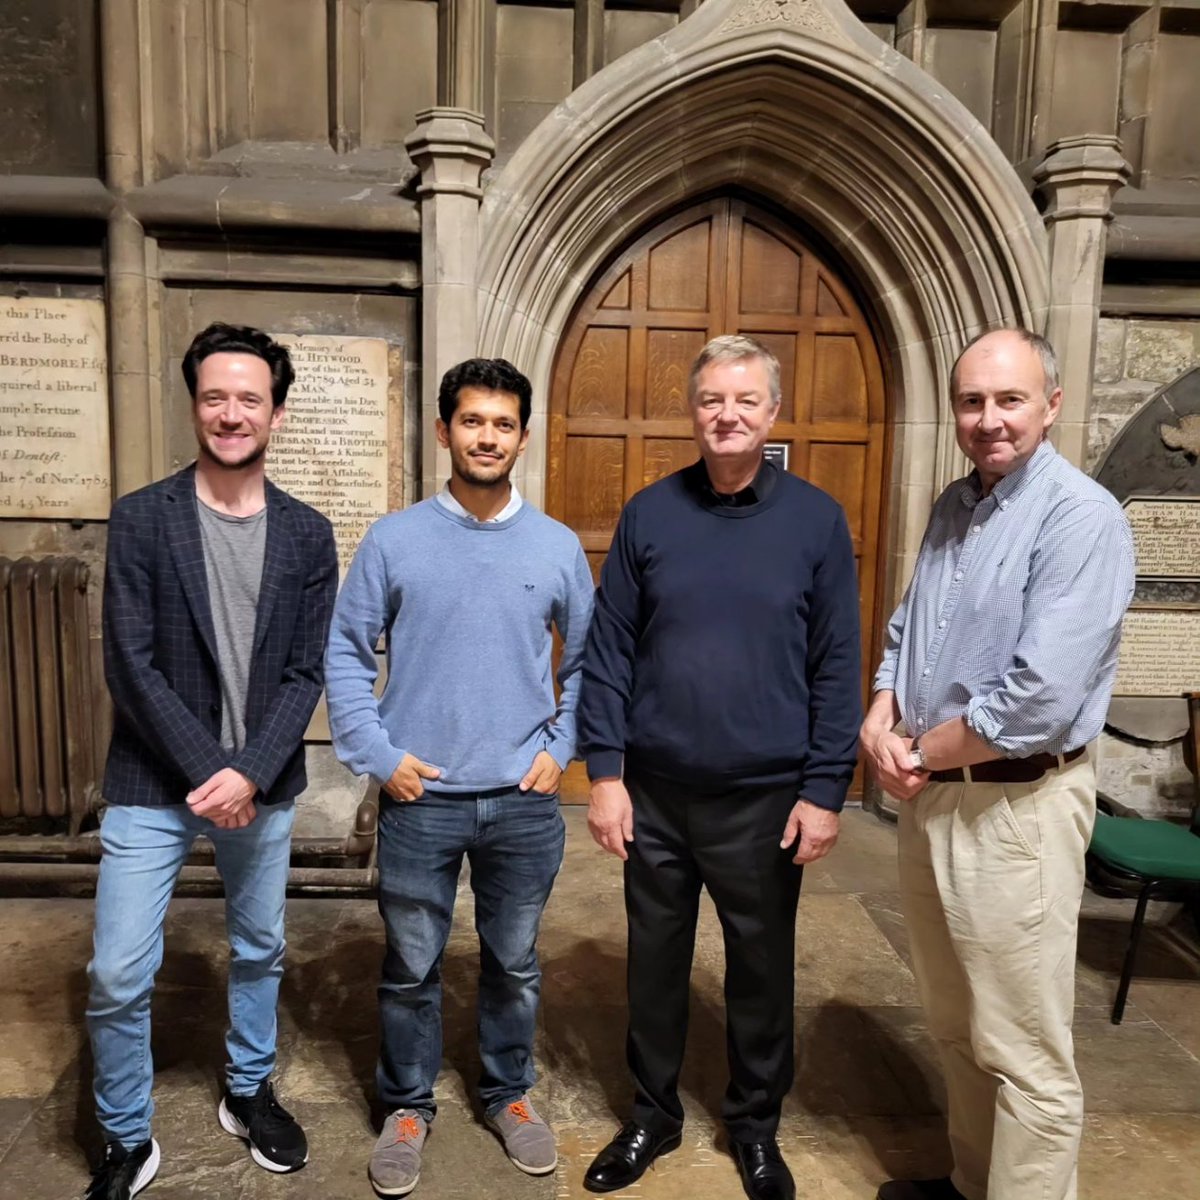 The @MagginiQuartet, joined by guest cellist Ashok Klouda, performed Beethoven, Rawsthorne, and Dvorak for a beautiful summer's evening in @StMarysNotts.